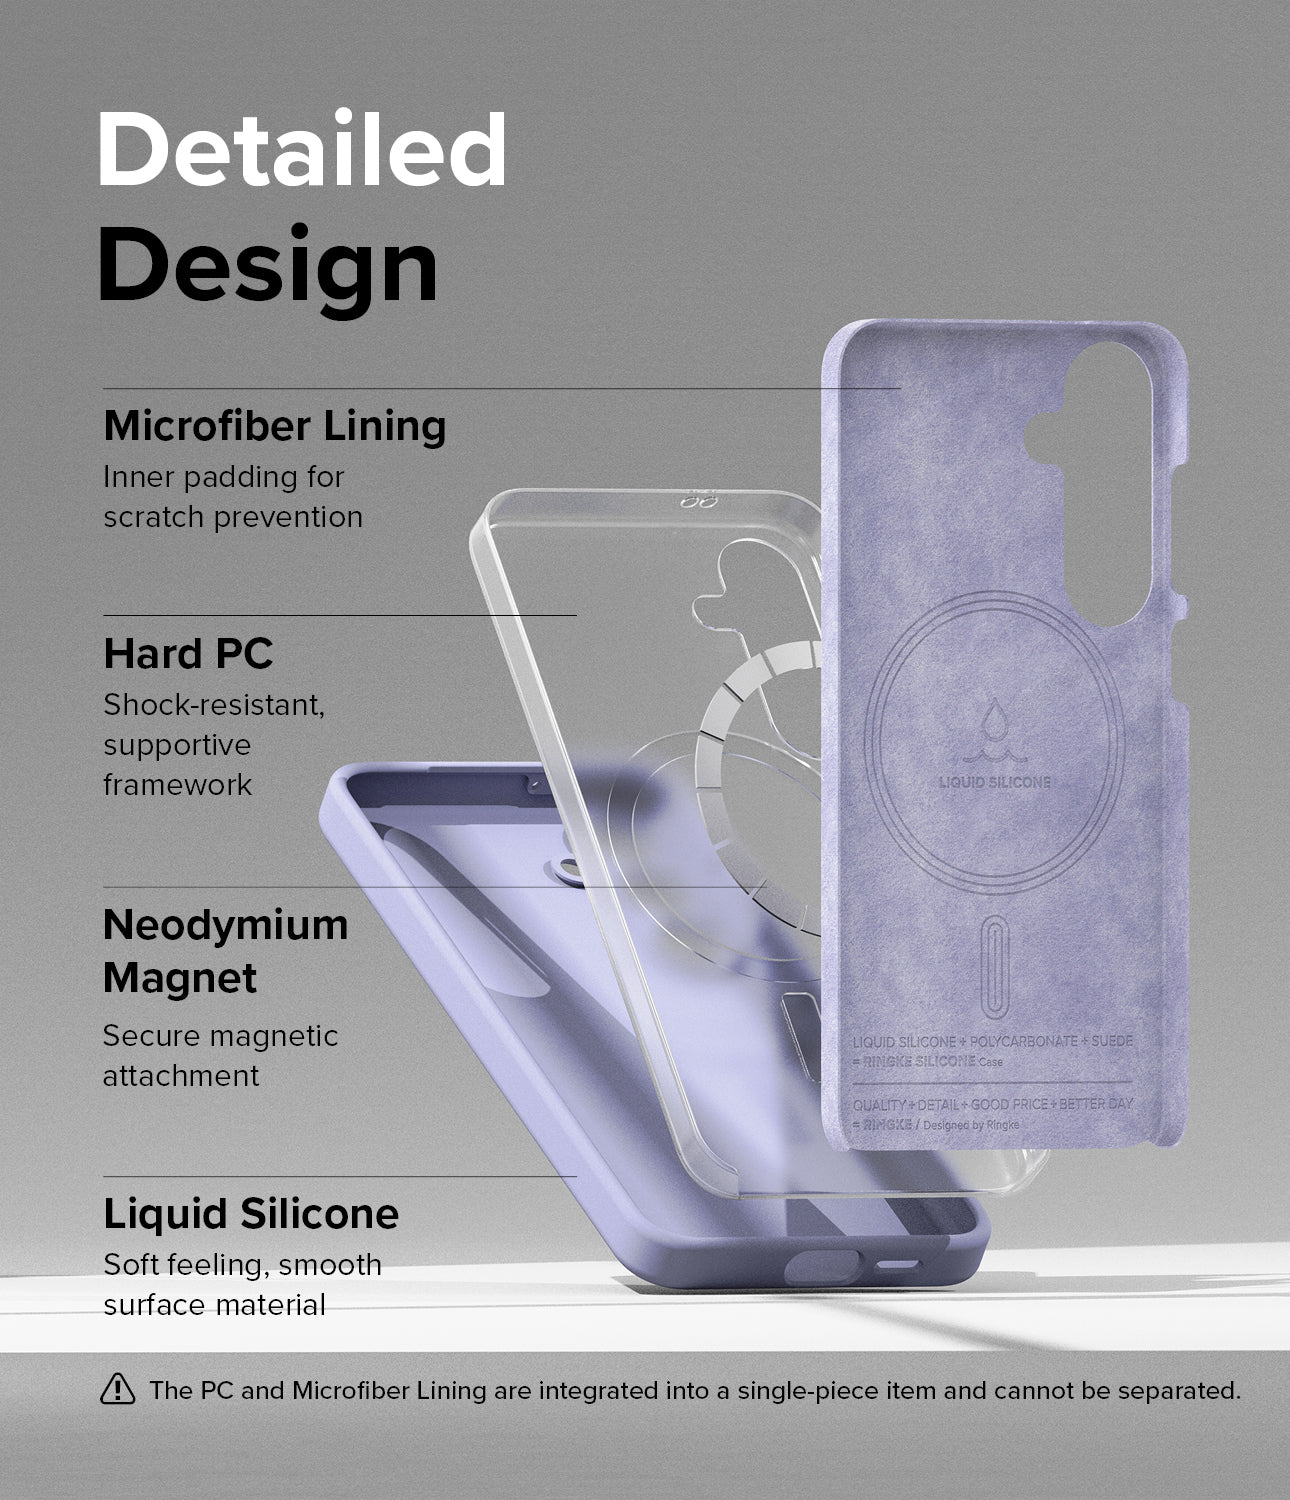 Galaxy S24 Case | Silicone Magnetic - Lavender - Detailed Design. Inner padding for scratch prevention with Microfiber Lining. Shock-resistant, supportive framework with Hard PC. Secure magnetic attachment with Neodymium Magnet. Soft feeling, smooth surface material with Liquid Silicone.